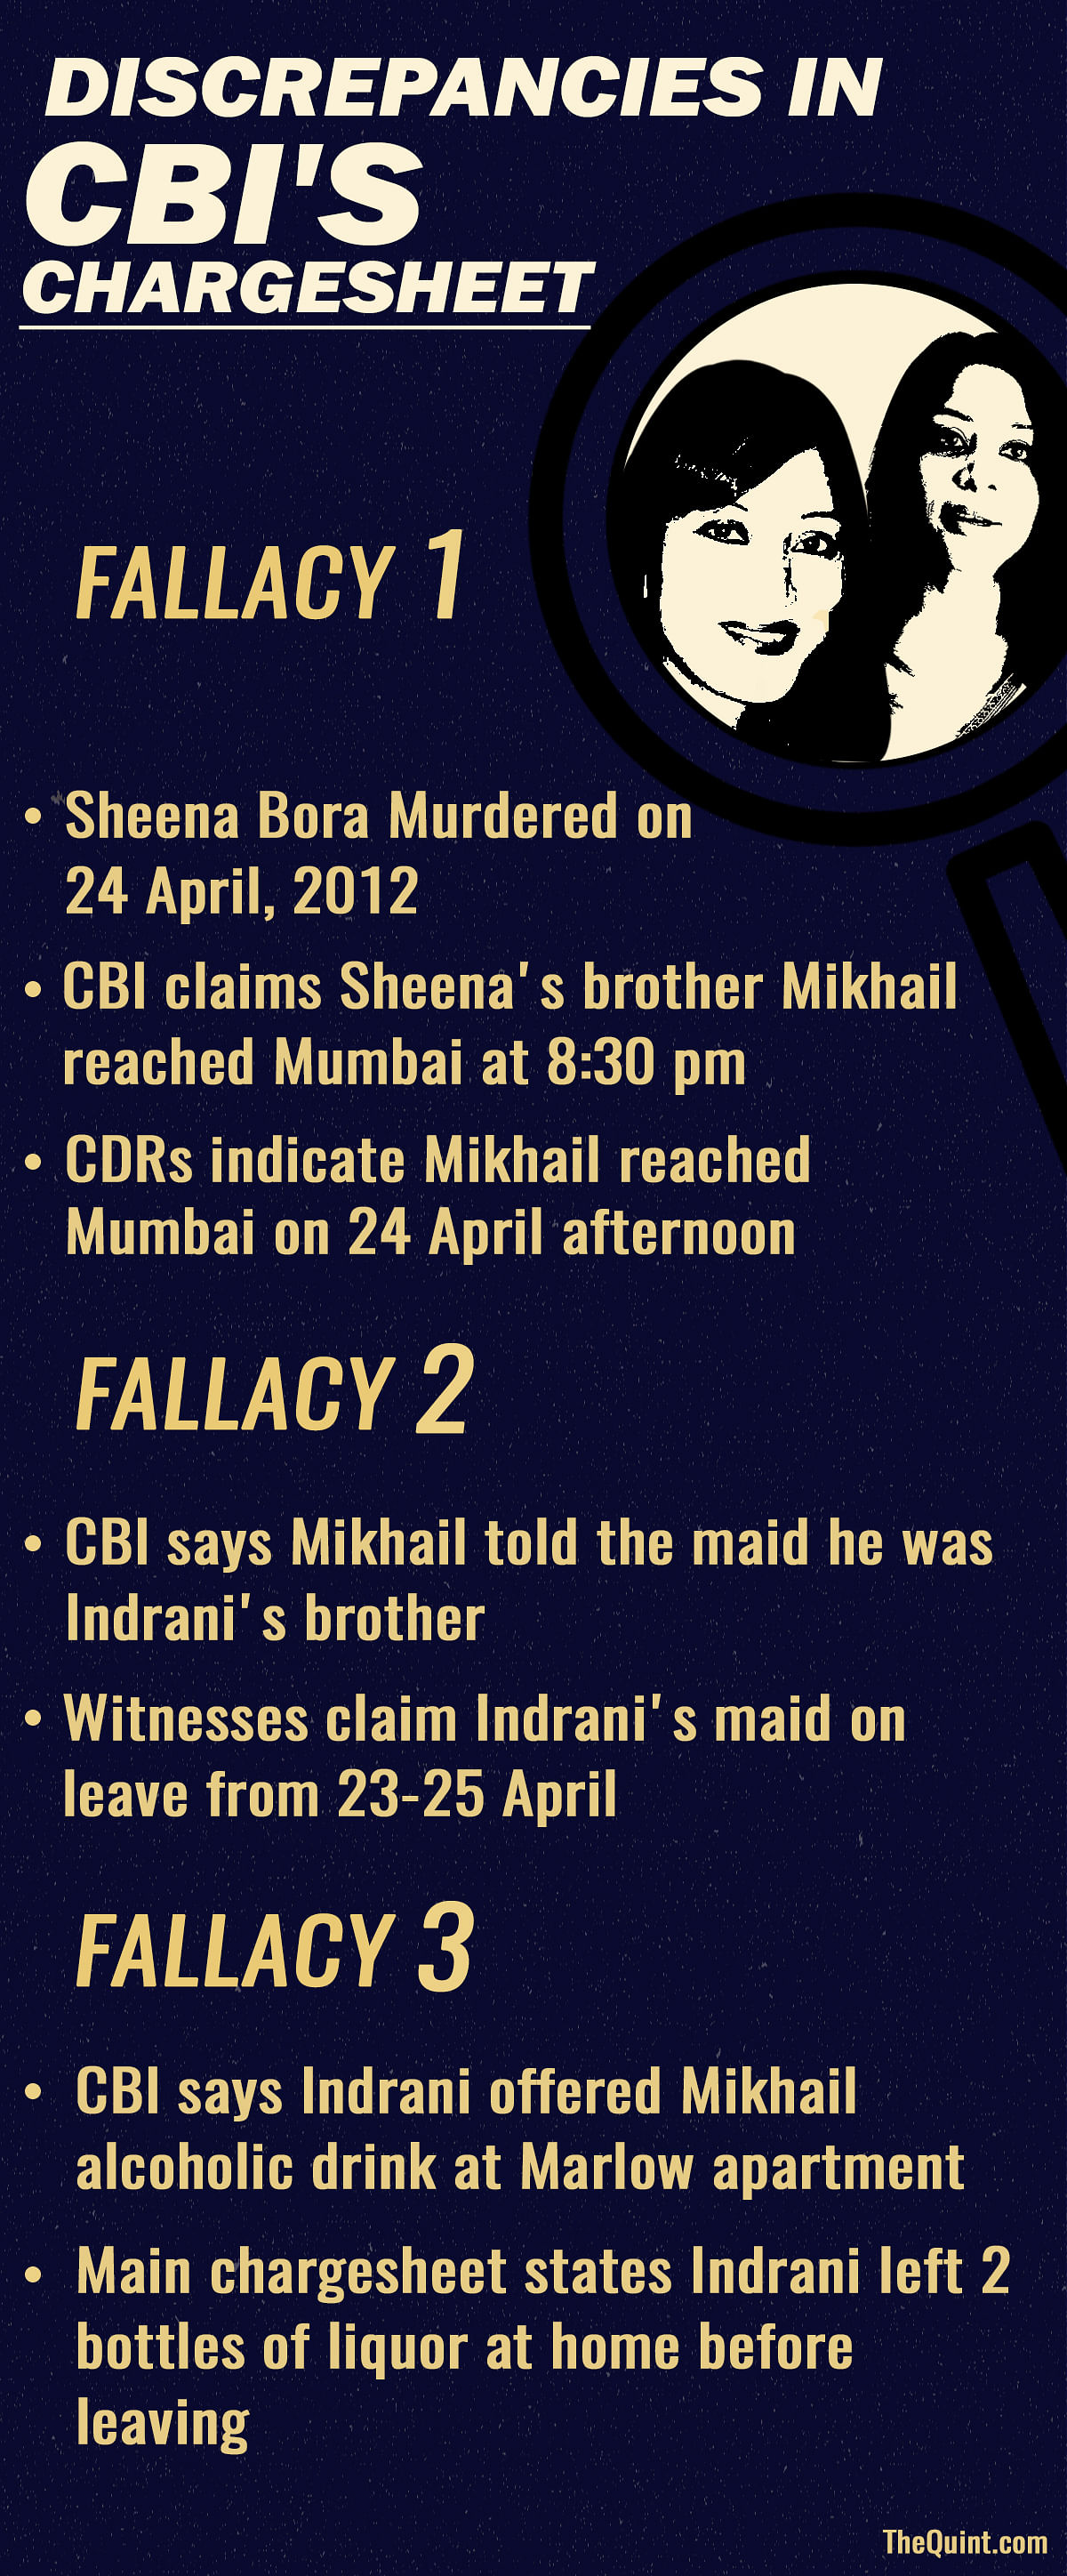 CBI’s chargesheet in Sheena case is replete with  inconsistencies that misrepresent the facts, writes Chandan Nandy.